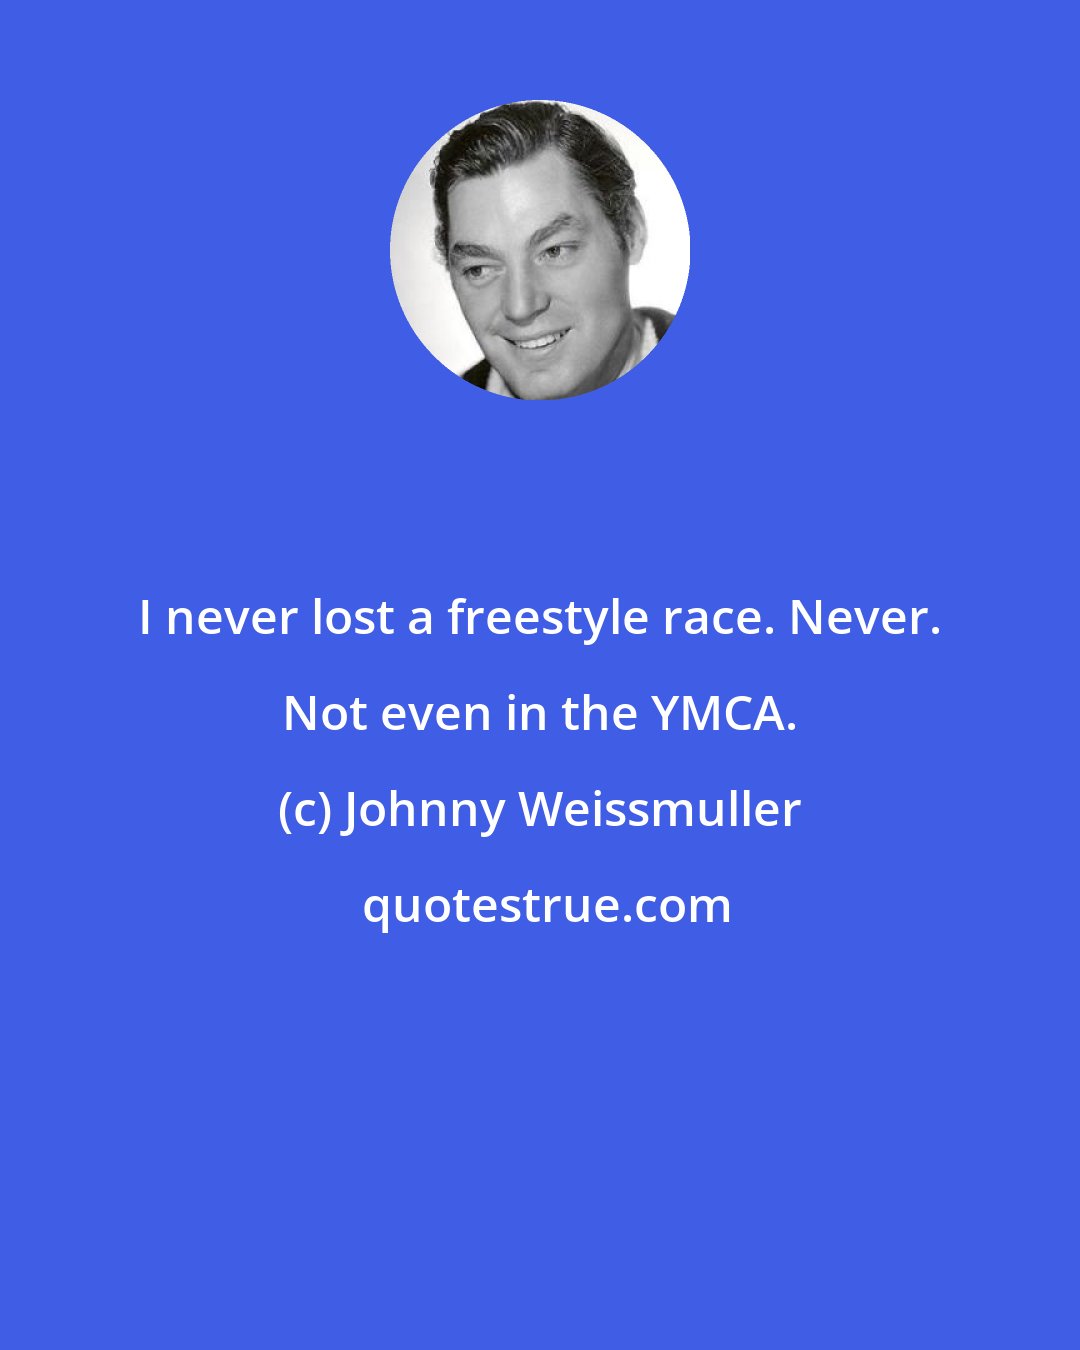 Johnny Weissmuller: I never lost a freestyle race. Never. Not even in the YMCA.